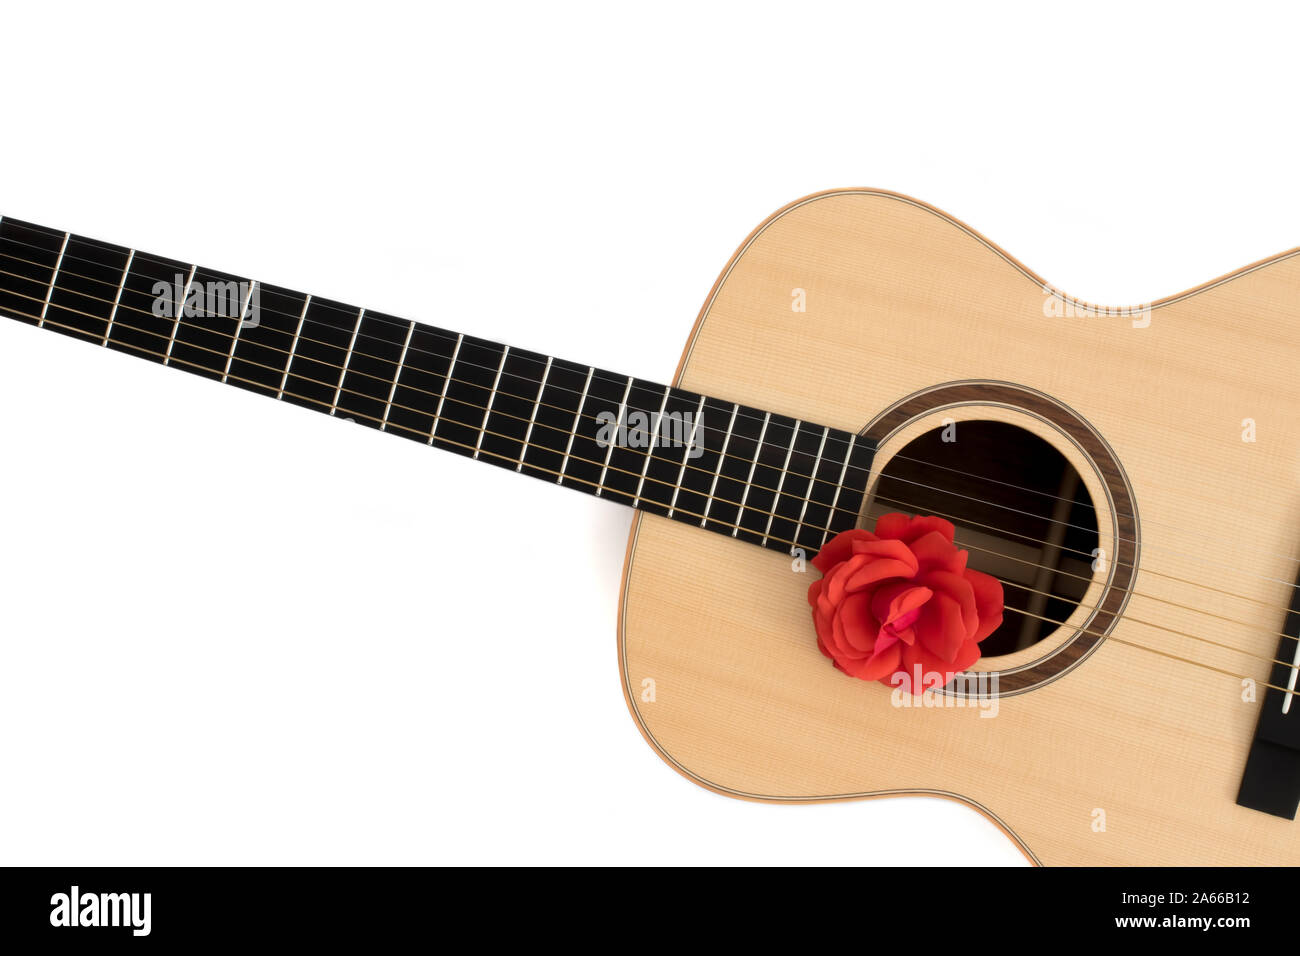 Love song. Acoustic guitar with red rose. Romantic music concept image. Folk guitar with flower on white background copy-space. Romance and serenade. Stock Photo